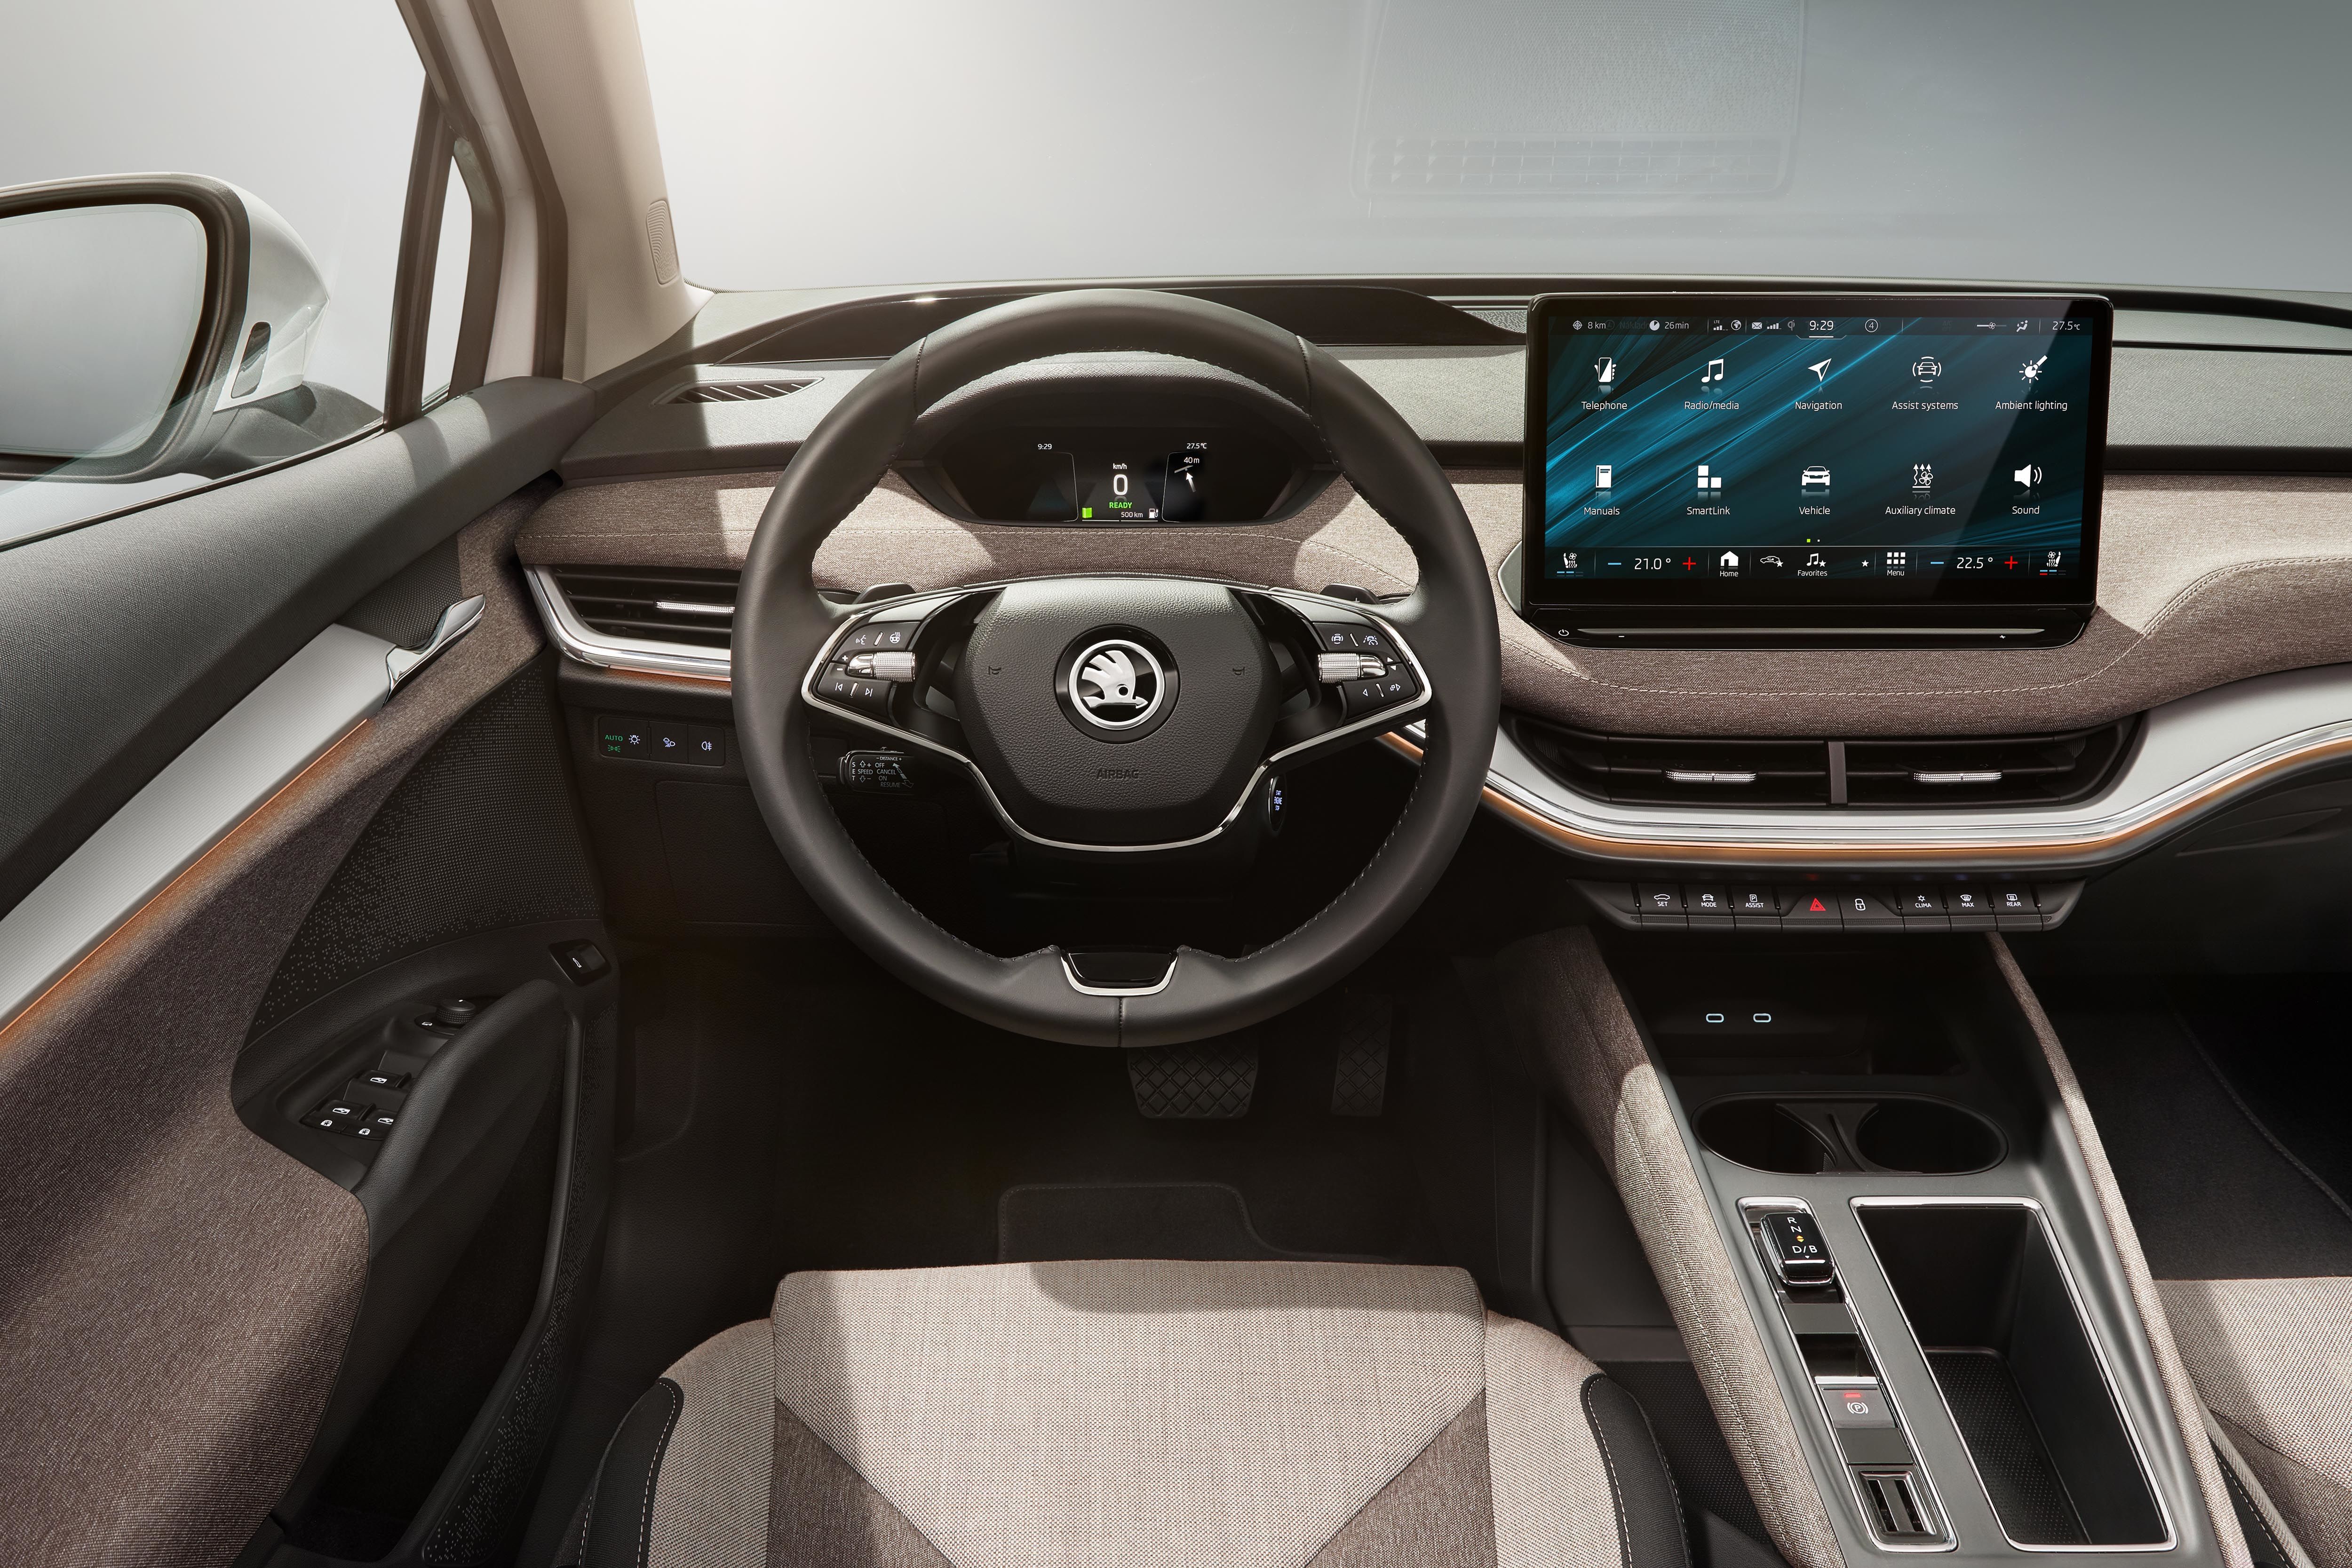 Interior of the Enyaq SUV is highlighted by its large 13-inch infotainment display.